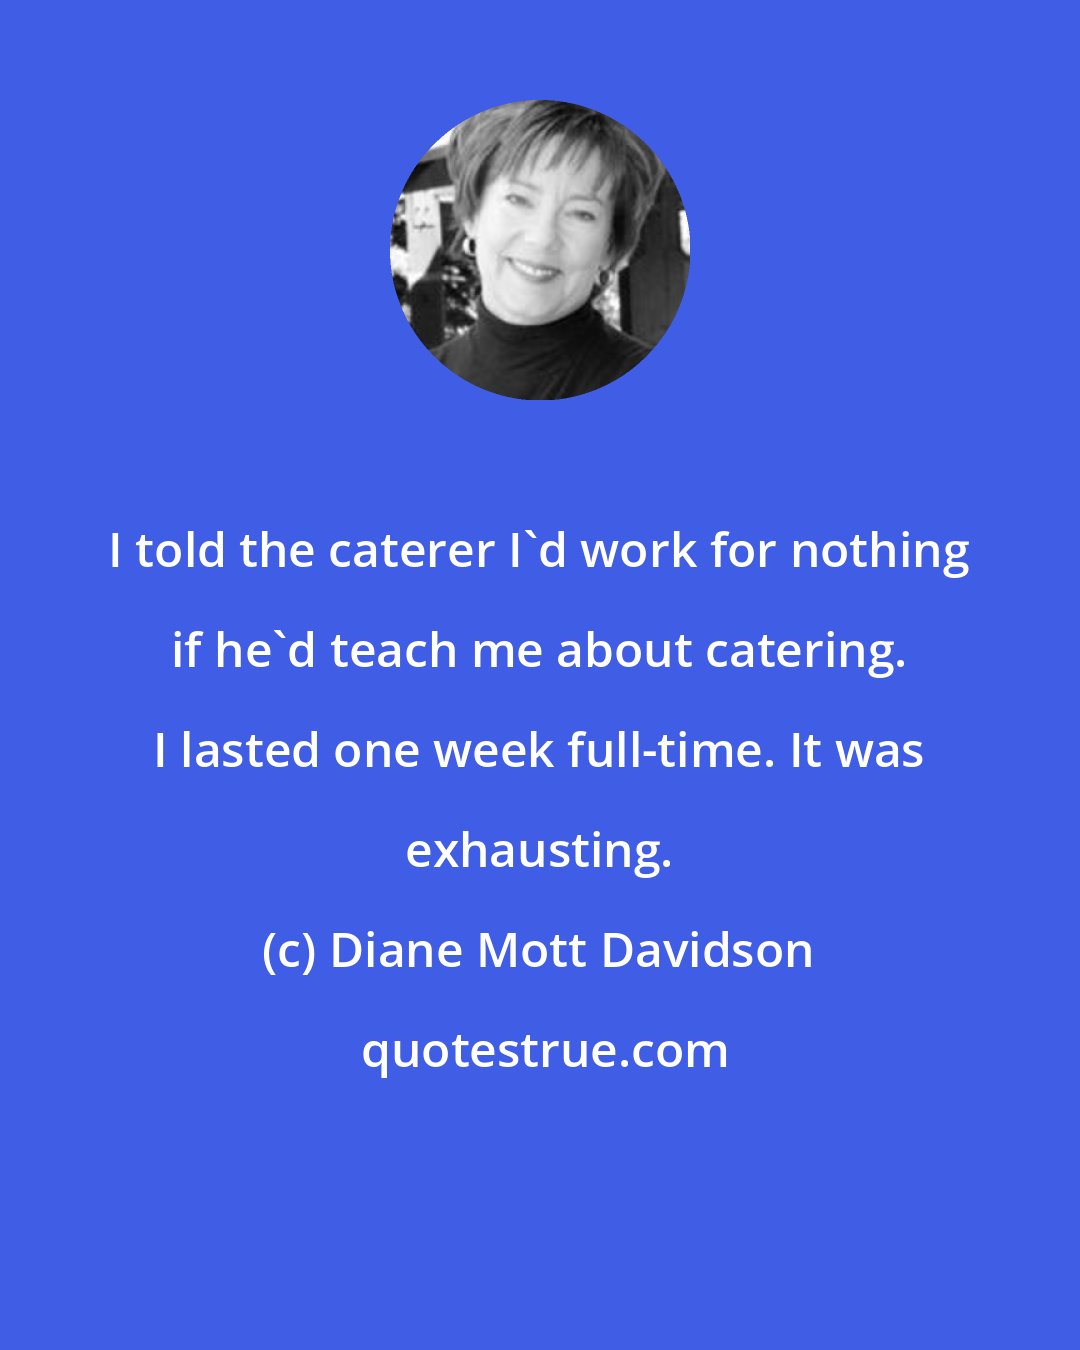 Diane Mott Davidson: I told the caterer I'd work for nothing if he'd teach me about catering. I lasted one week full-time. It was exhausting.